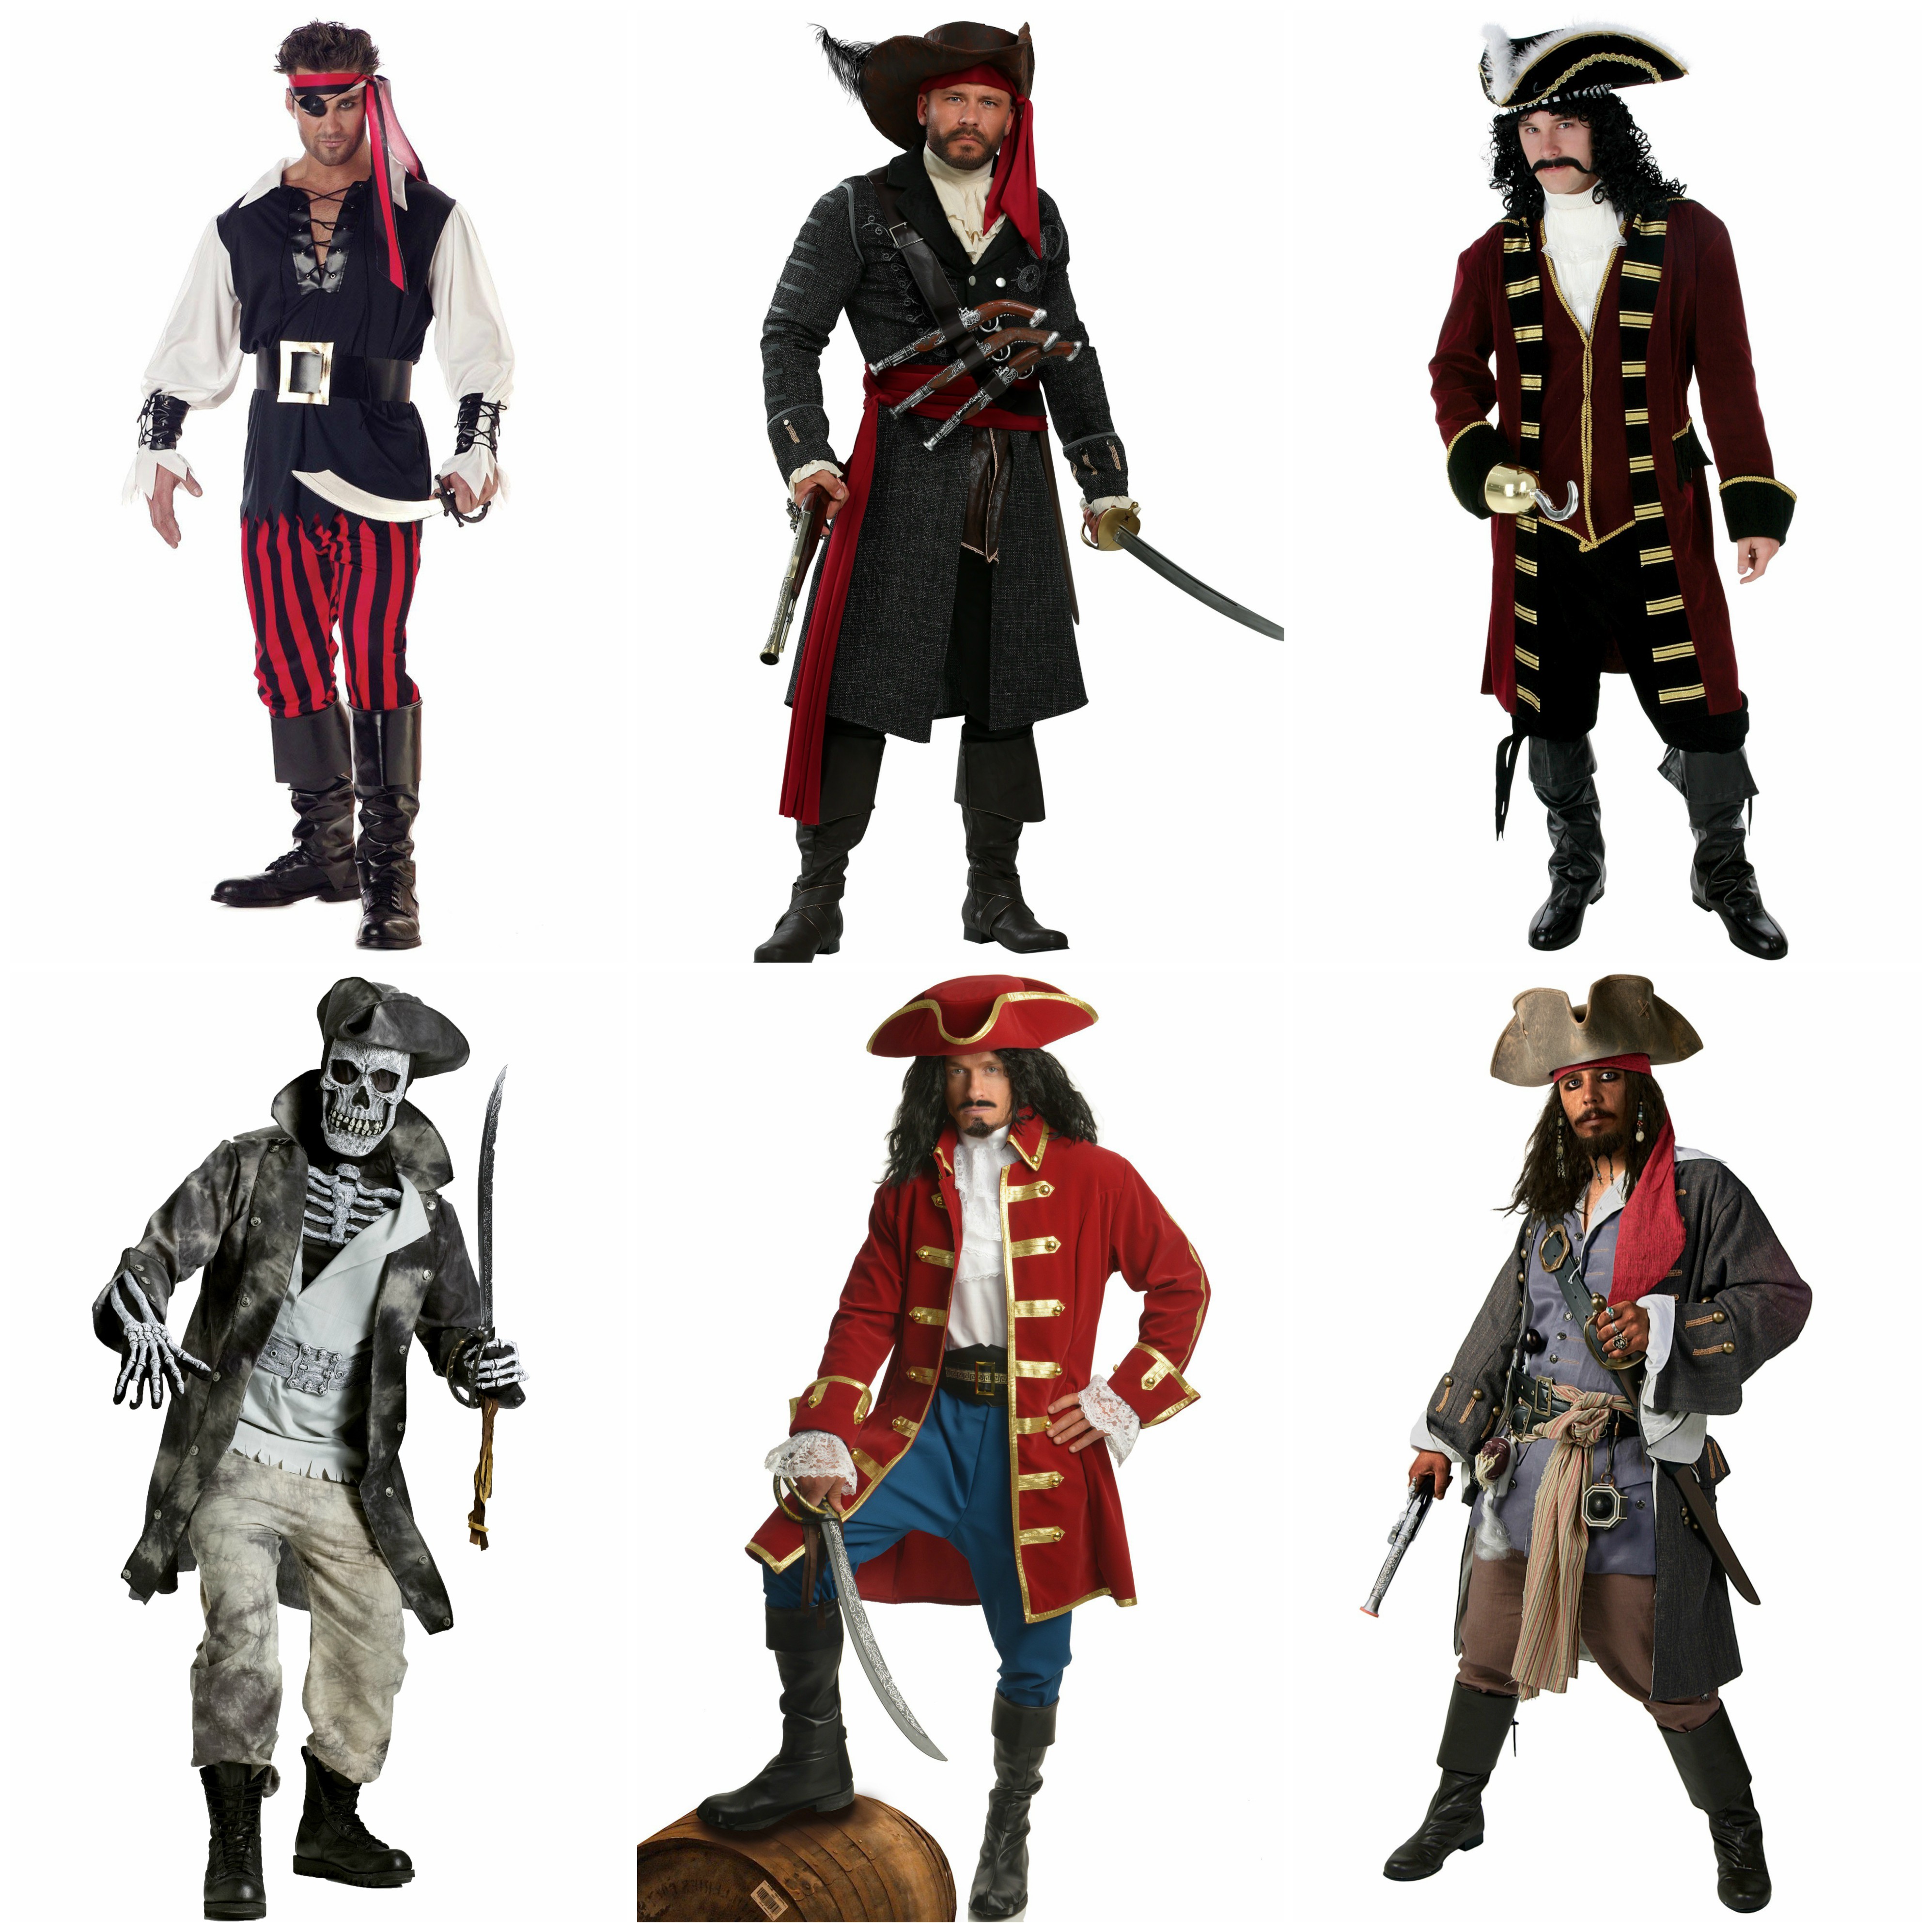 Pirate costumes for men